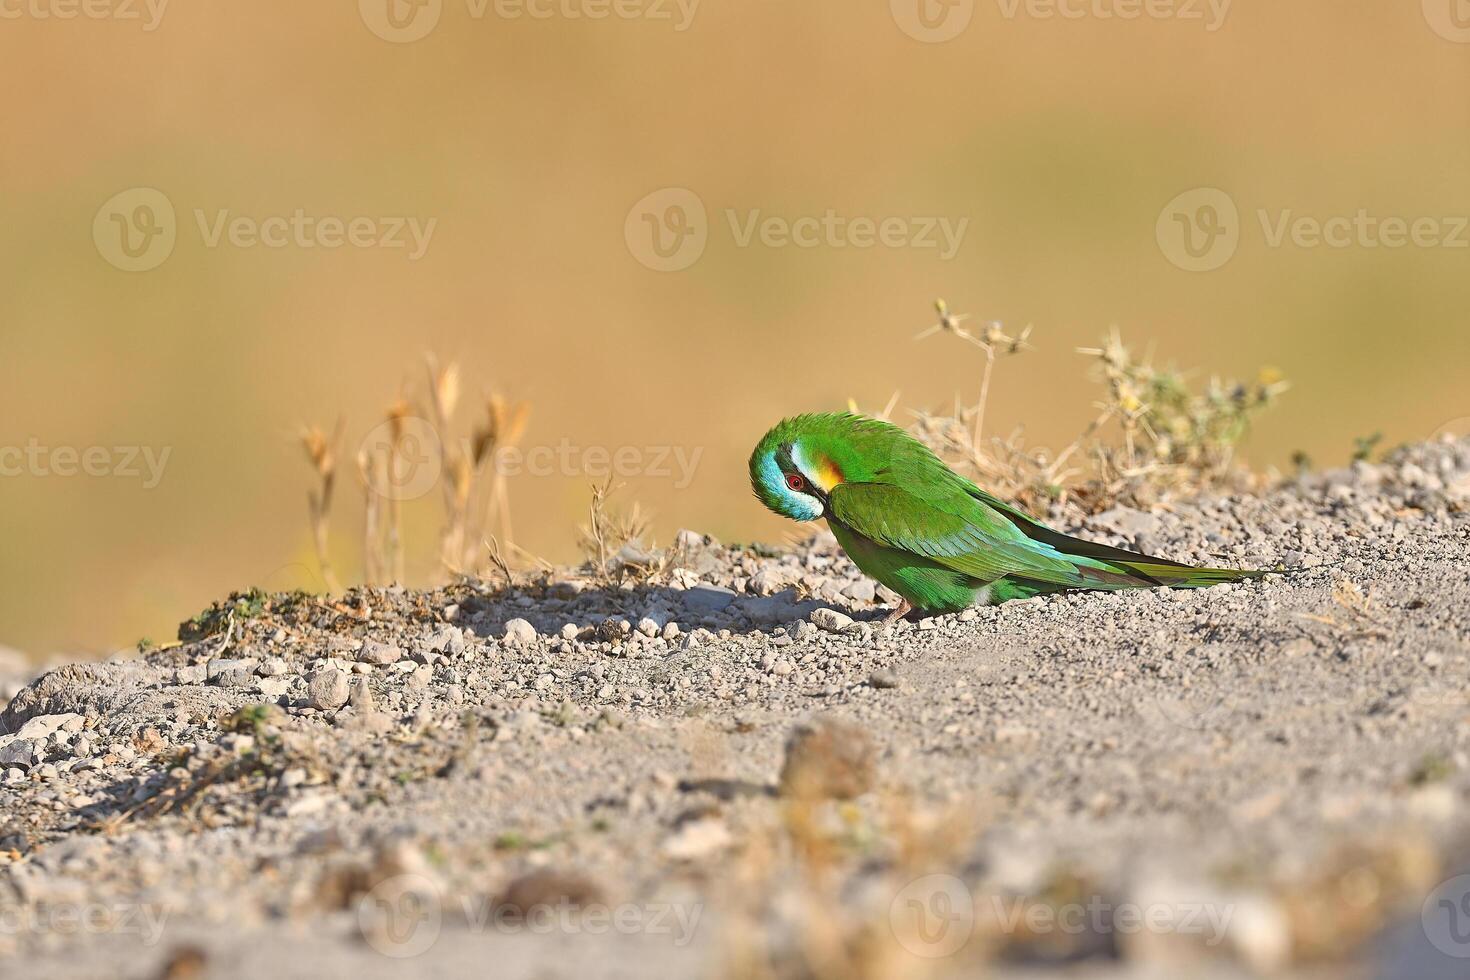 Blue-cheeked bee-eater sitting on a rock. Merops persicus photo